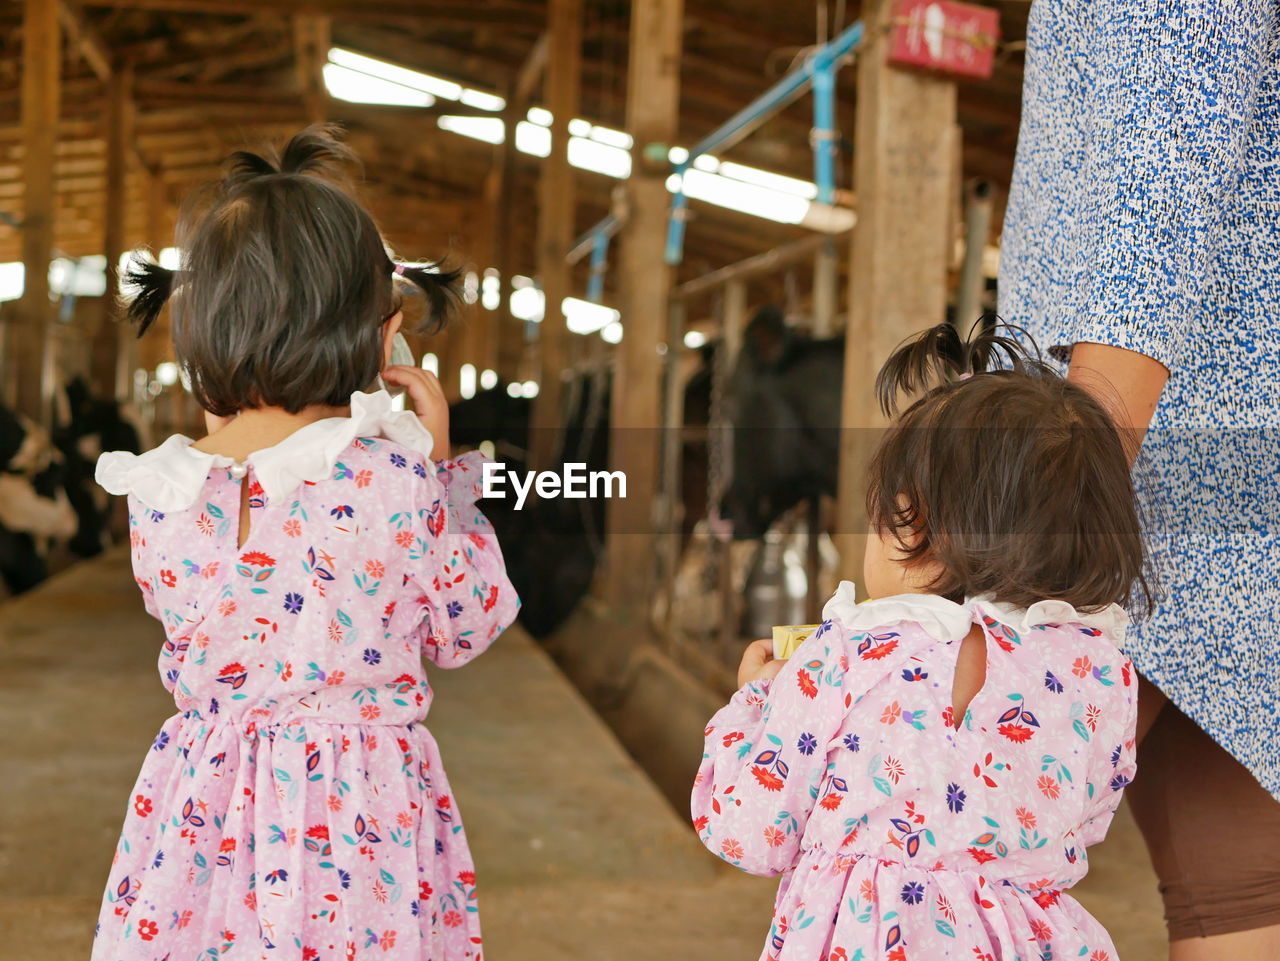 Rear view of girls standing in animal pen